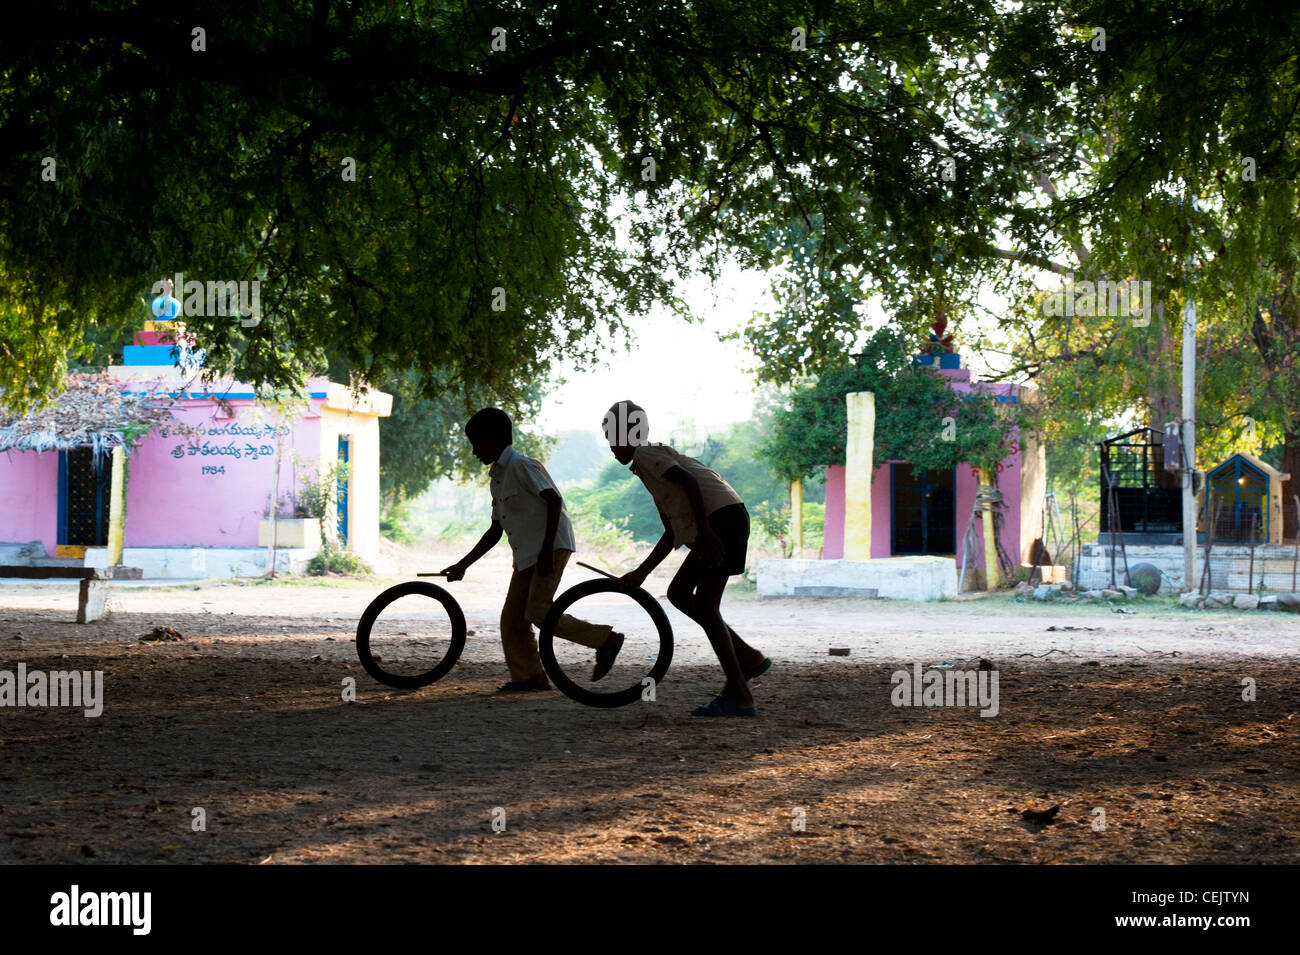 Indian boys playing with tyres under trees in the indian countryside. Silhouette. Andhra Pradesh, India Stock Photo